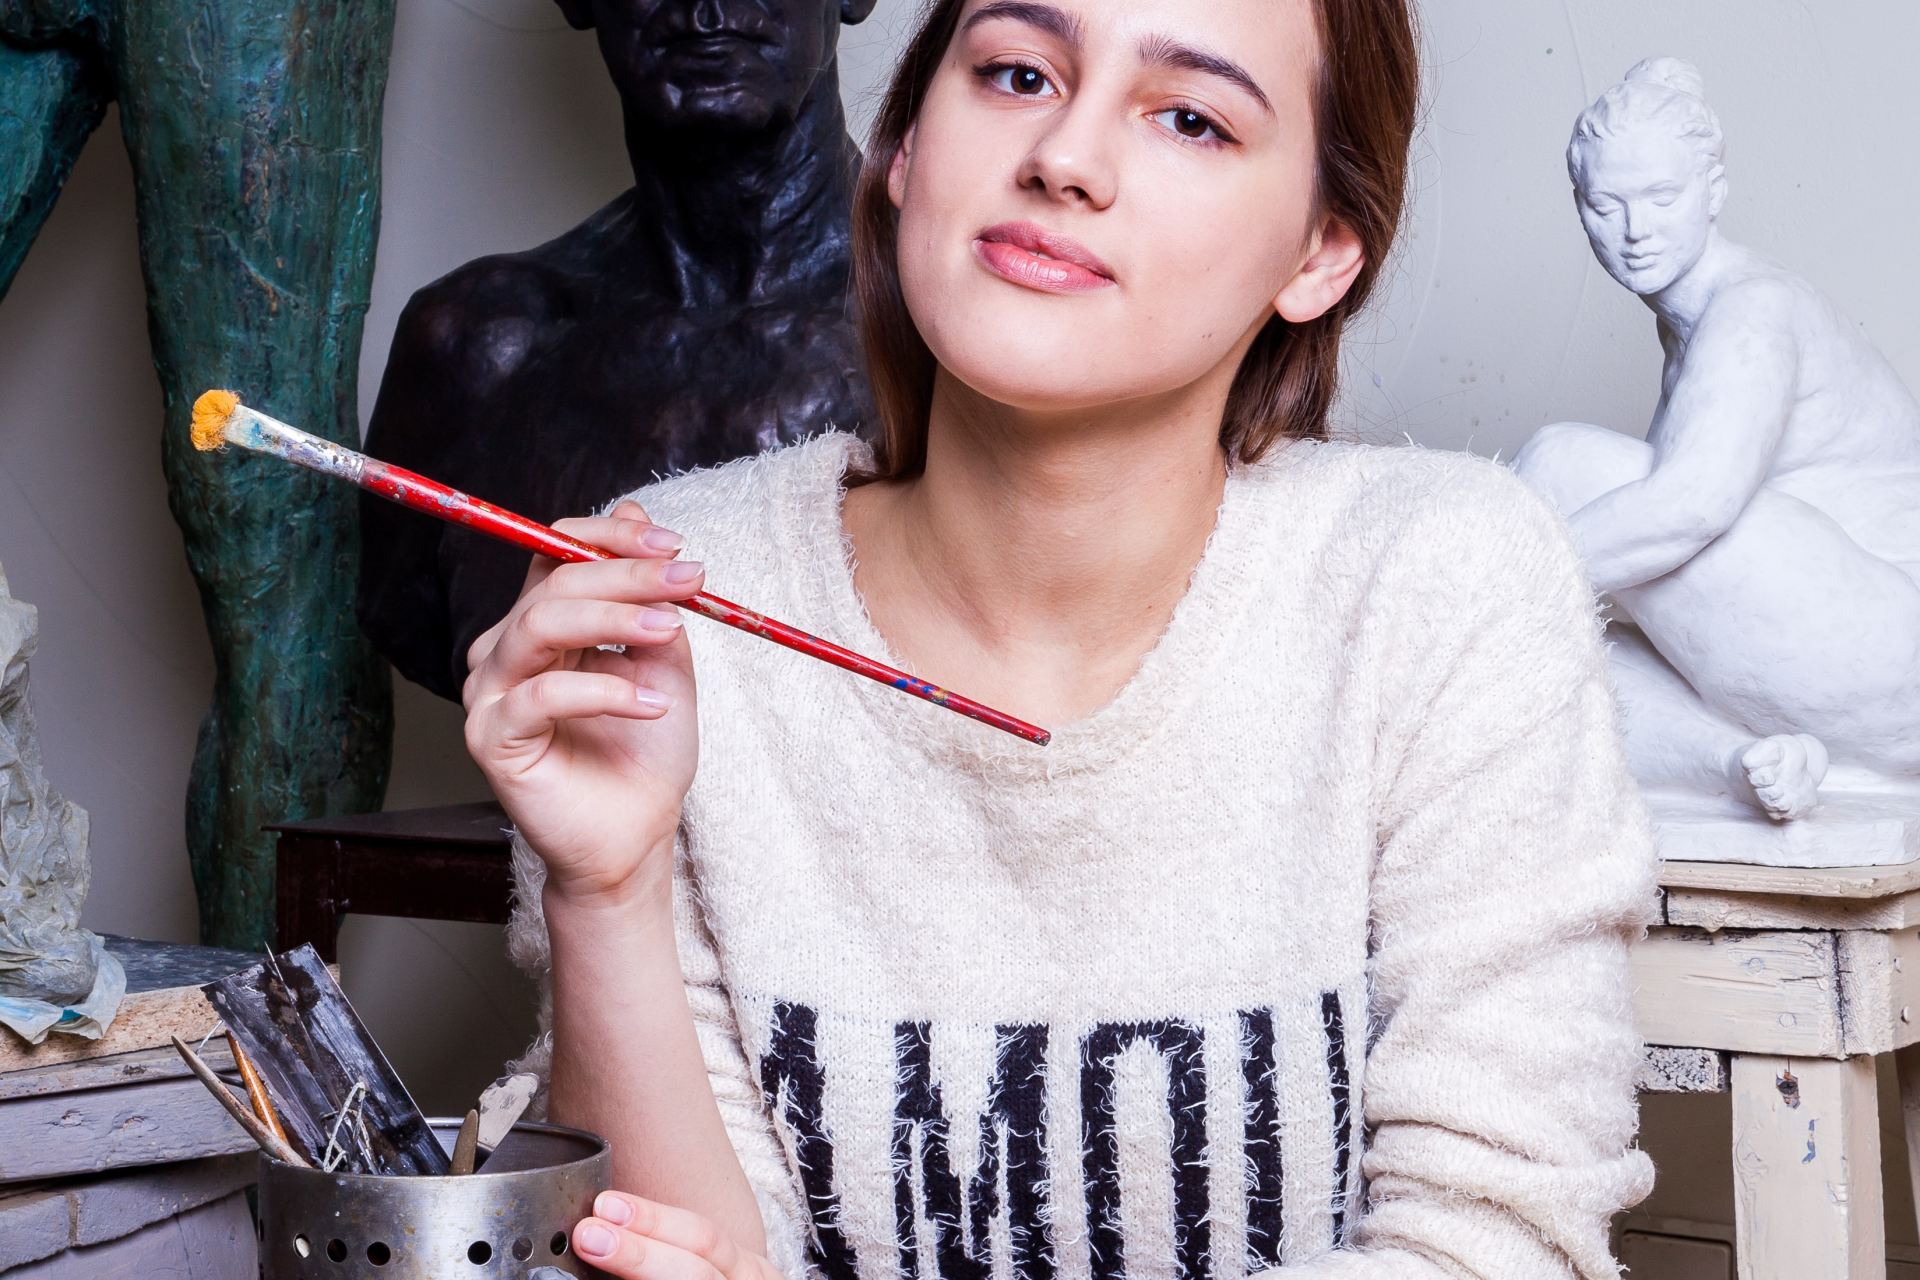 woman leaning on table and holding paint brush